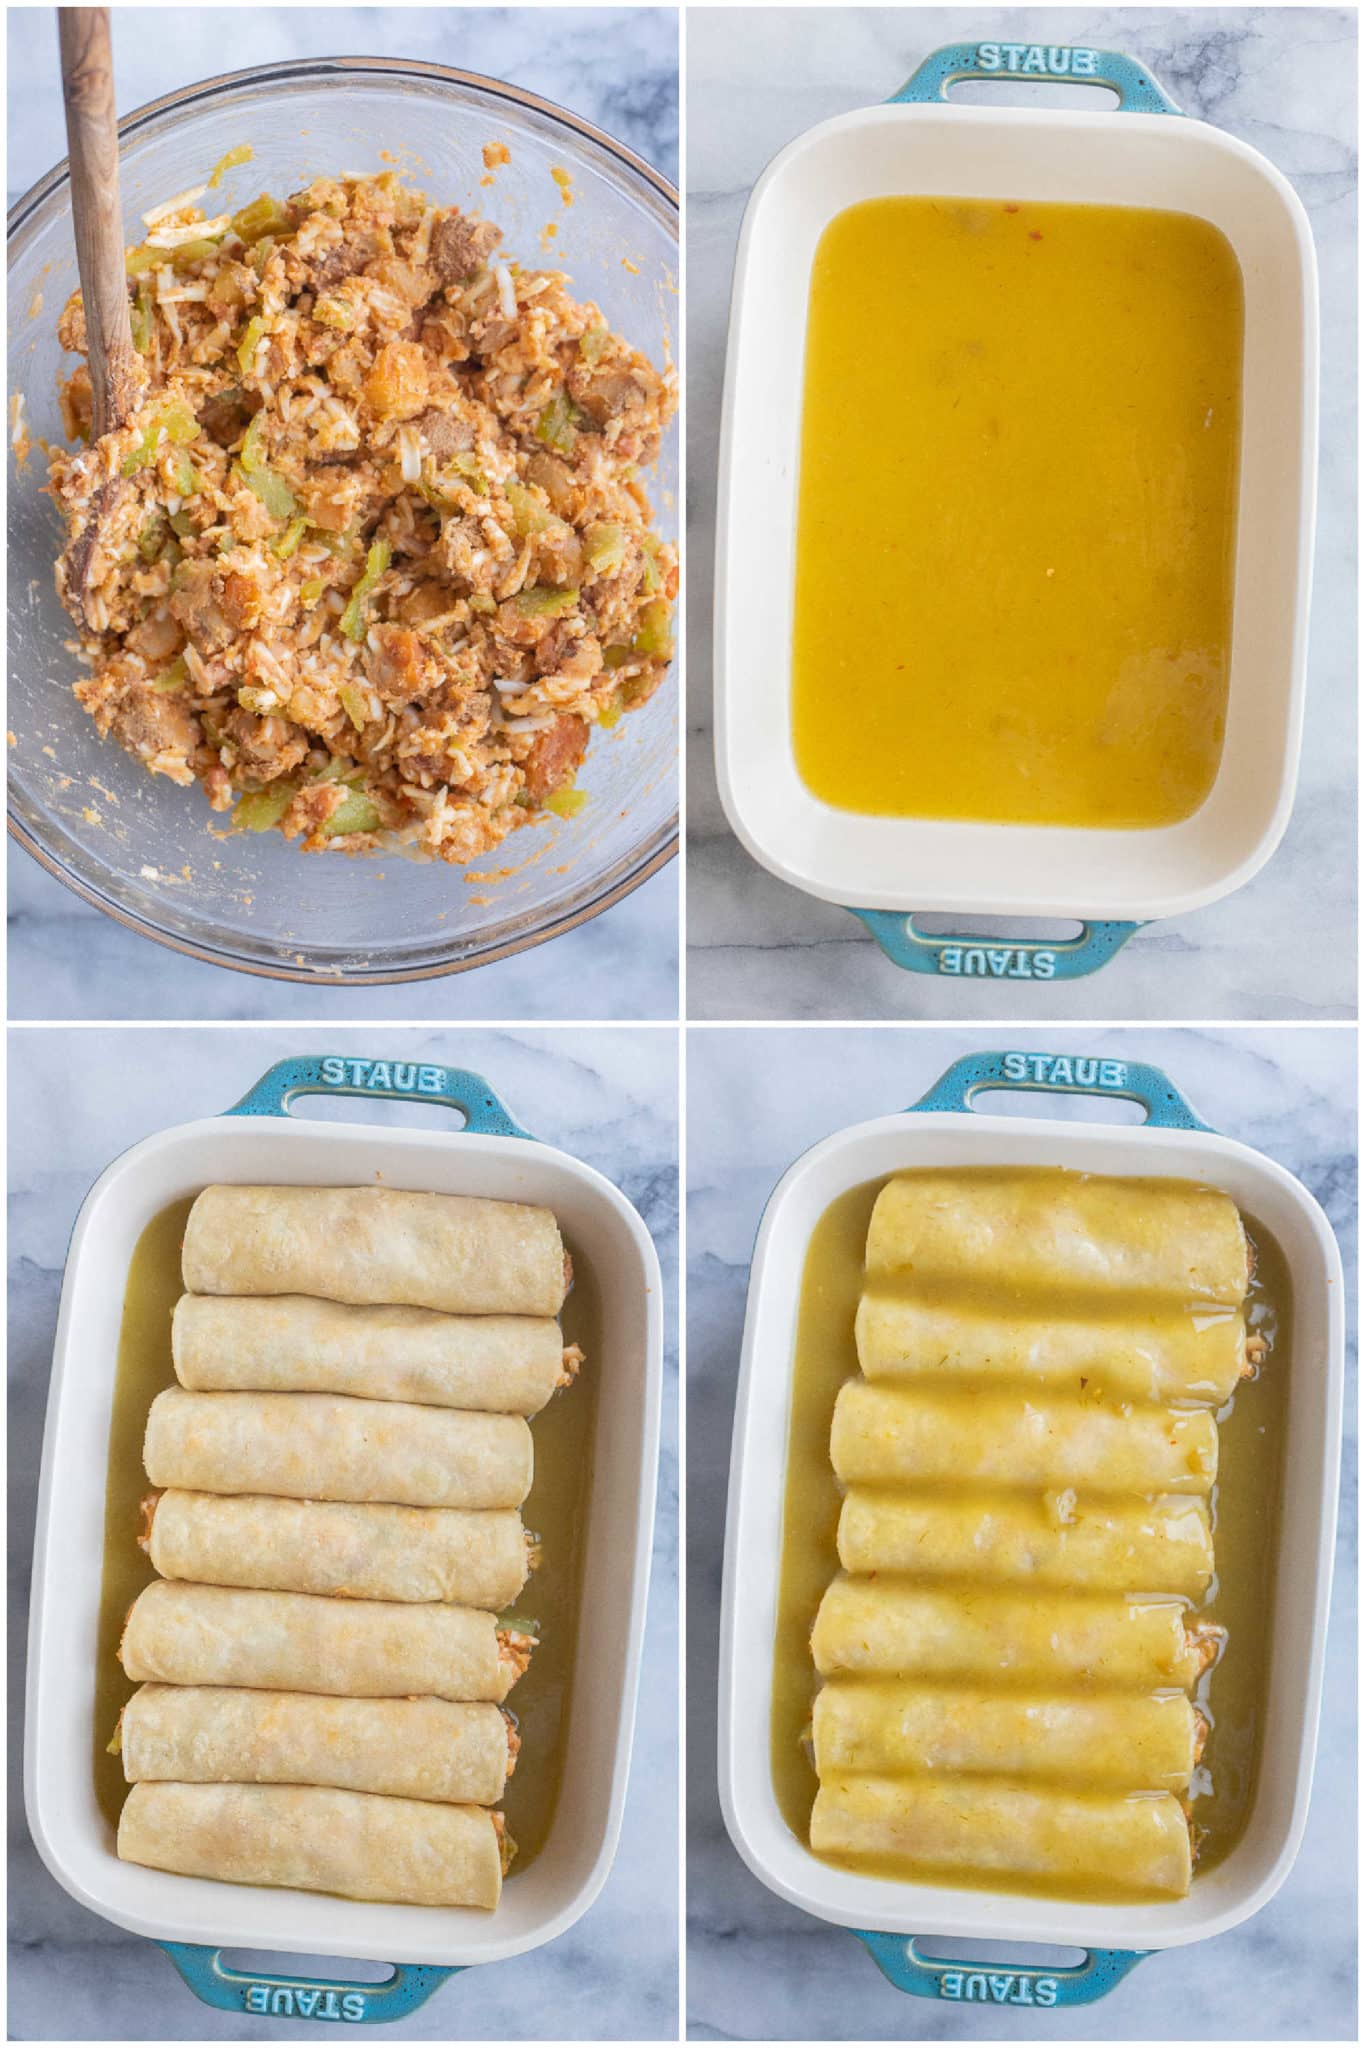 showing how to assemble the cheesy green Chile enchiladas in a baking dish